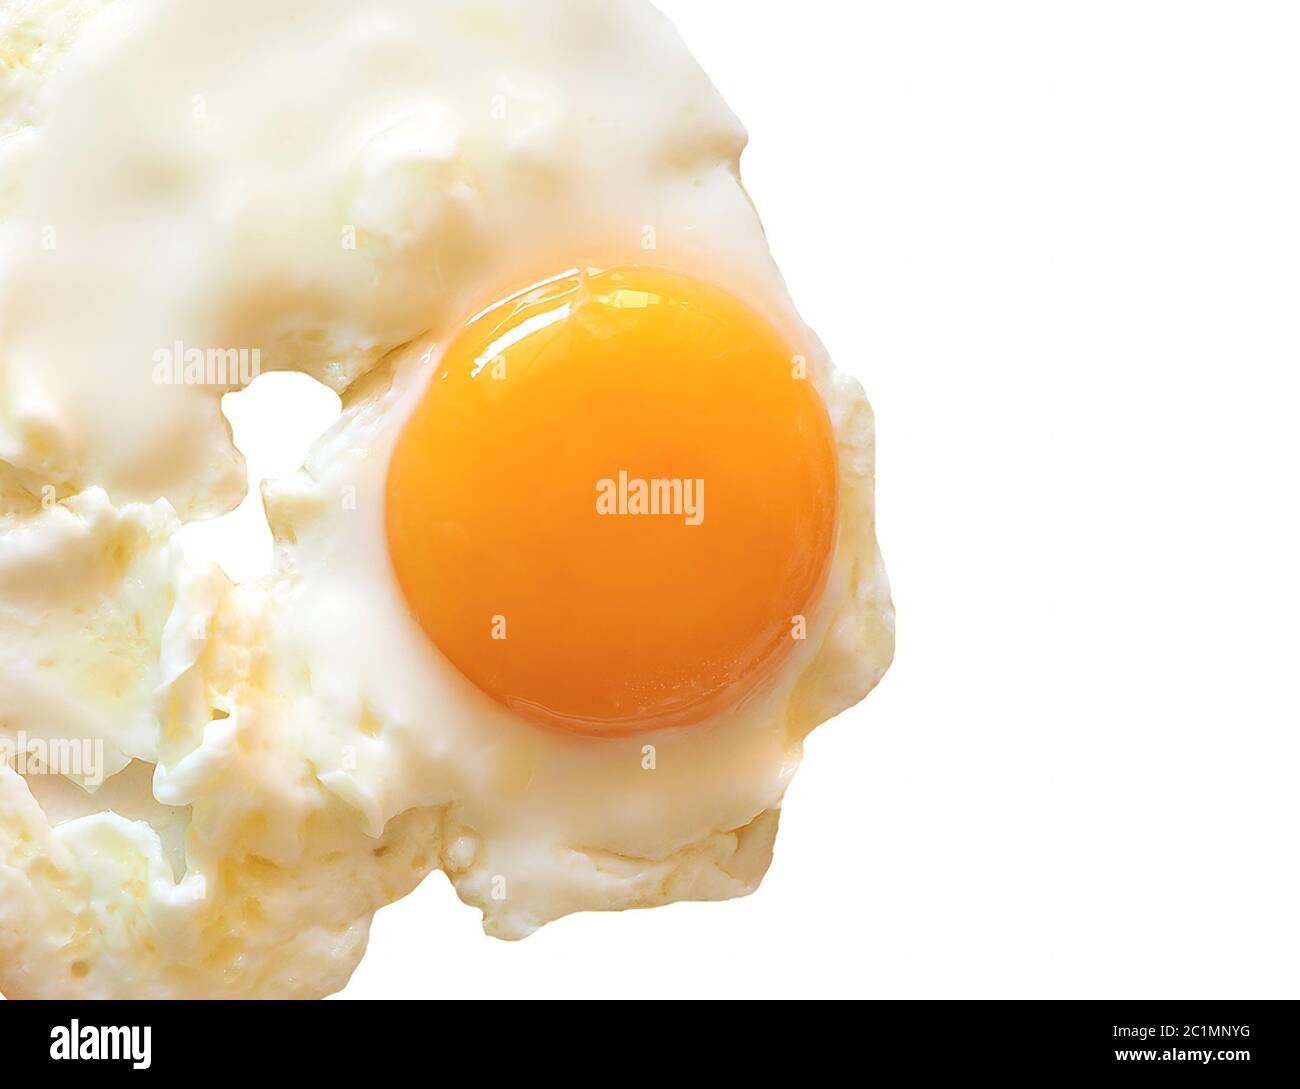 Fried egg isolated over white with copy space Stock Photo